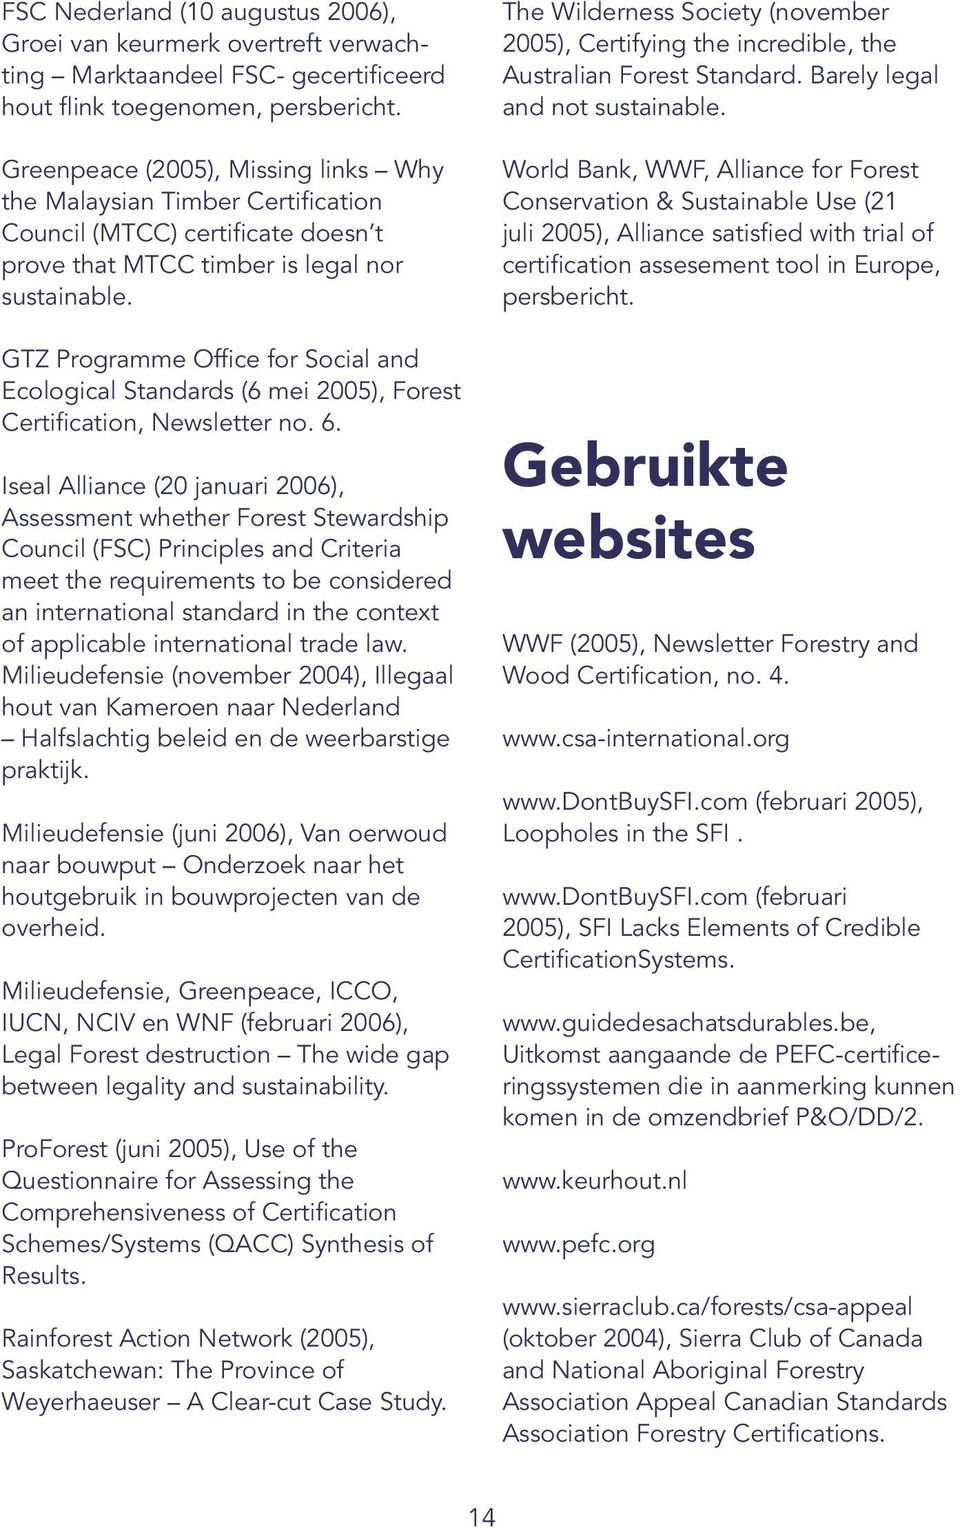 GTZ Programme Office for Social and Ecological Standards (6 mei 2005), Forest Certification, Newsletter no. 6.